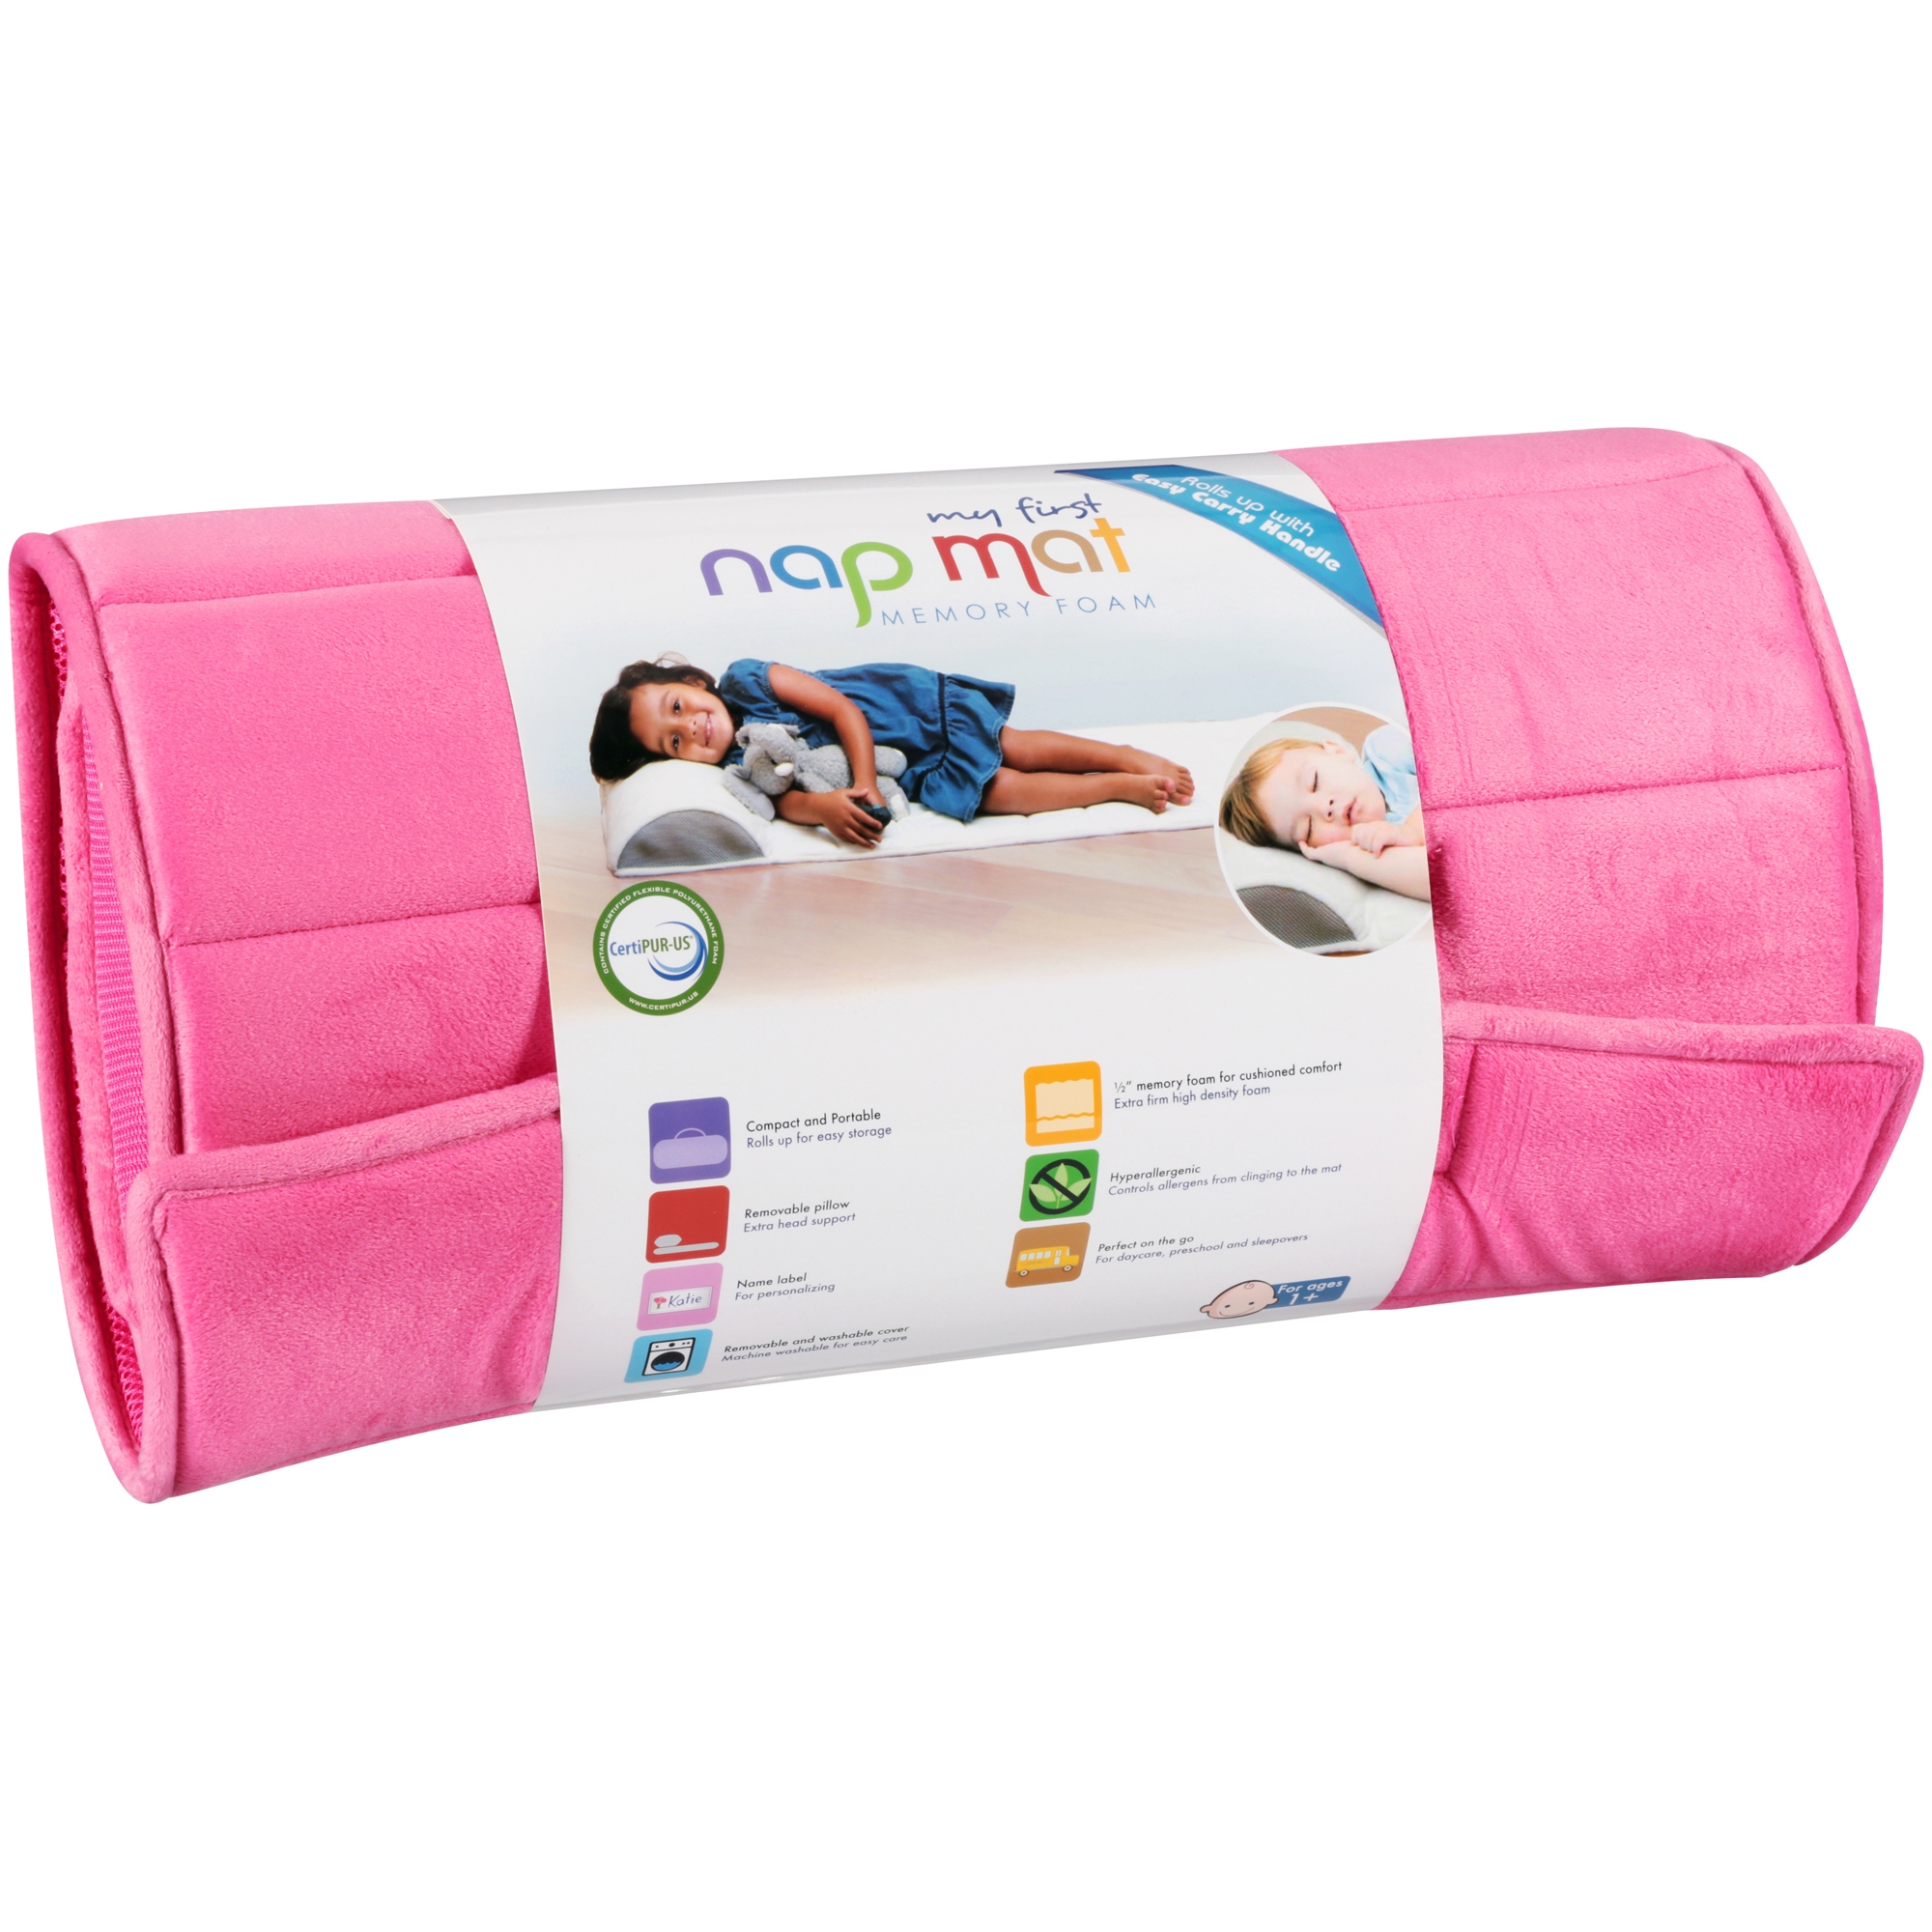 My First Pillow Female Pink Solid Memory Foam Nap Mats, Cushioned Removable Washable Cooling - image 4 of 5